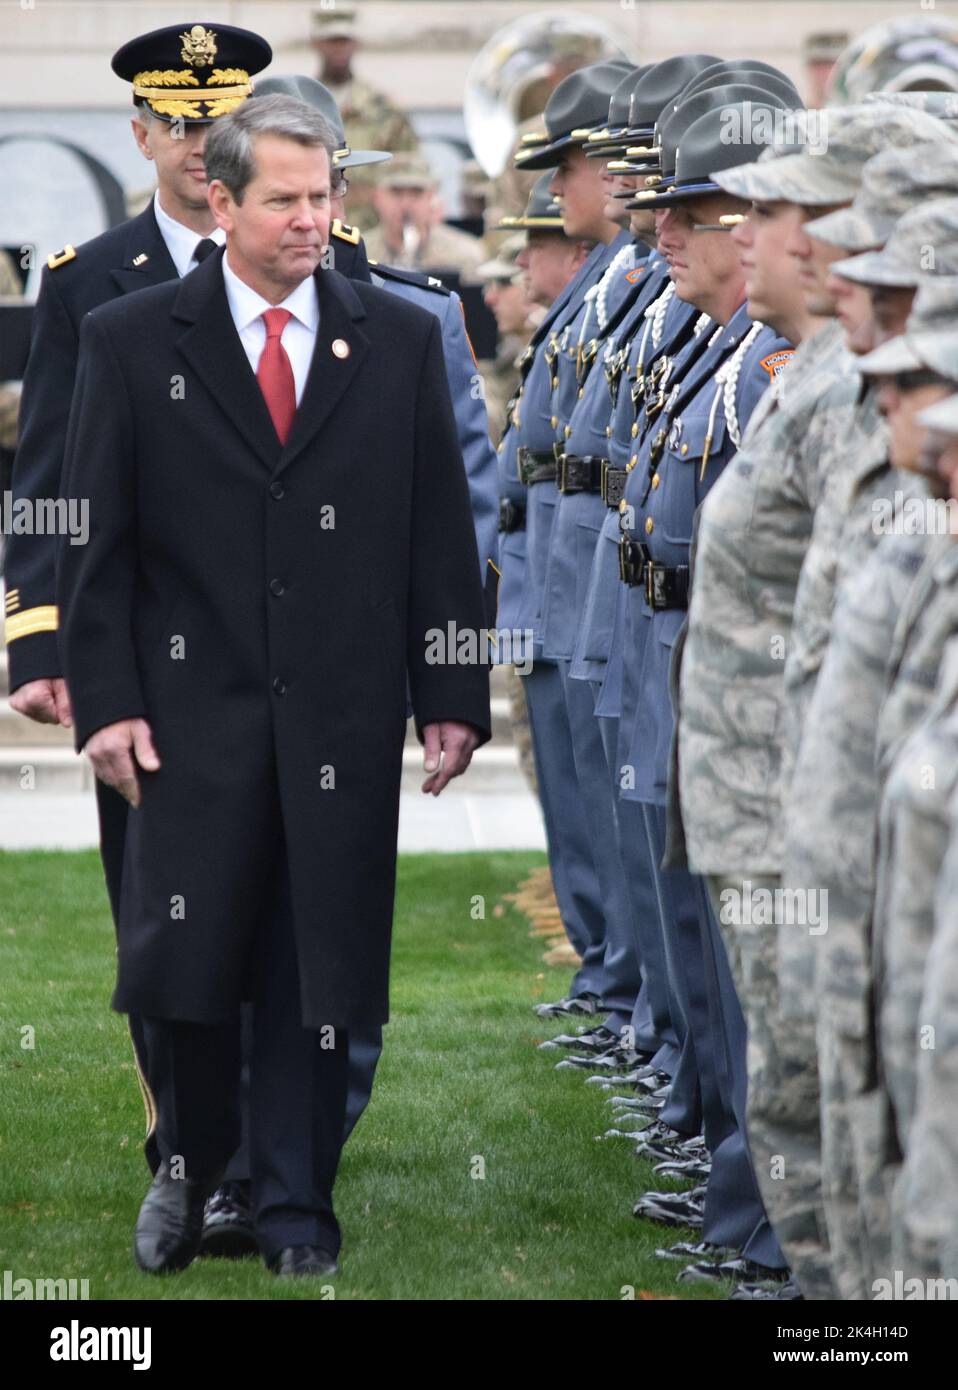 Georgia Governor Brian Kemp reviewing the troops of the Georgia State Defense Force, Georgia National Guard, and Georgia State Police on January 14, 2019 in Liberty Plaza next to the Georgia State Capitol in downtown Atlanta. (USA) Stock Photo